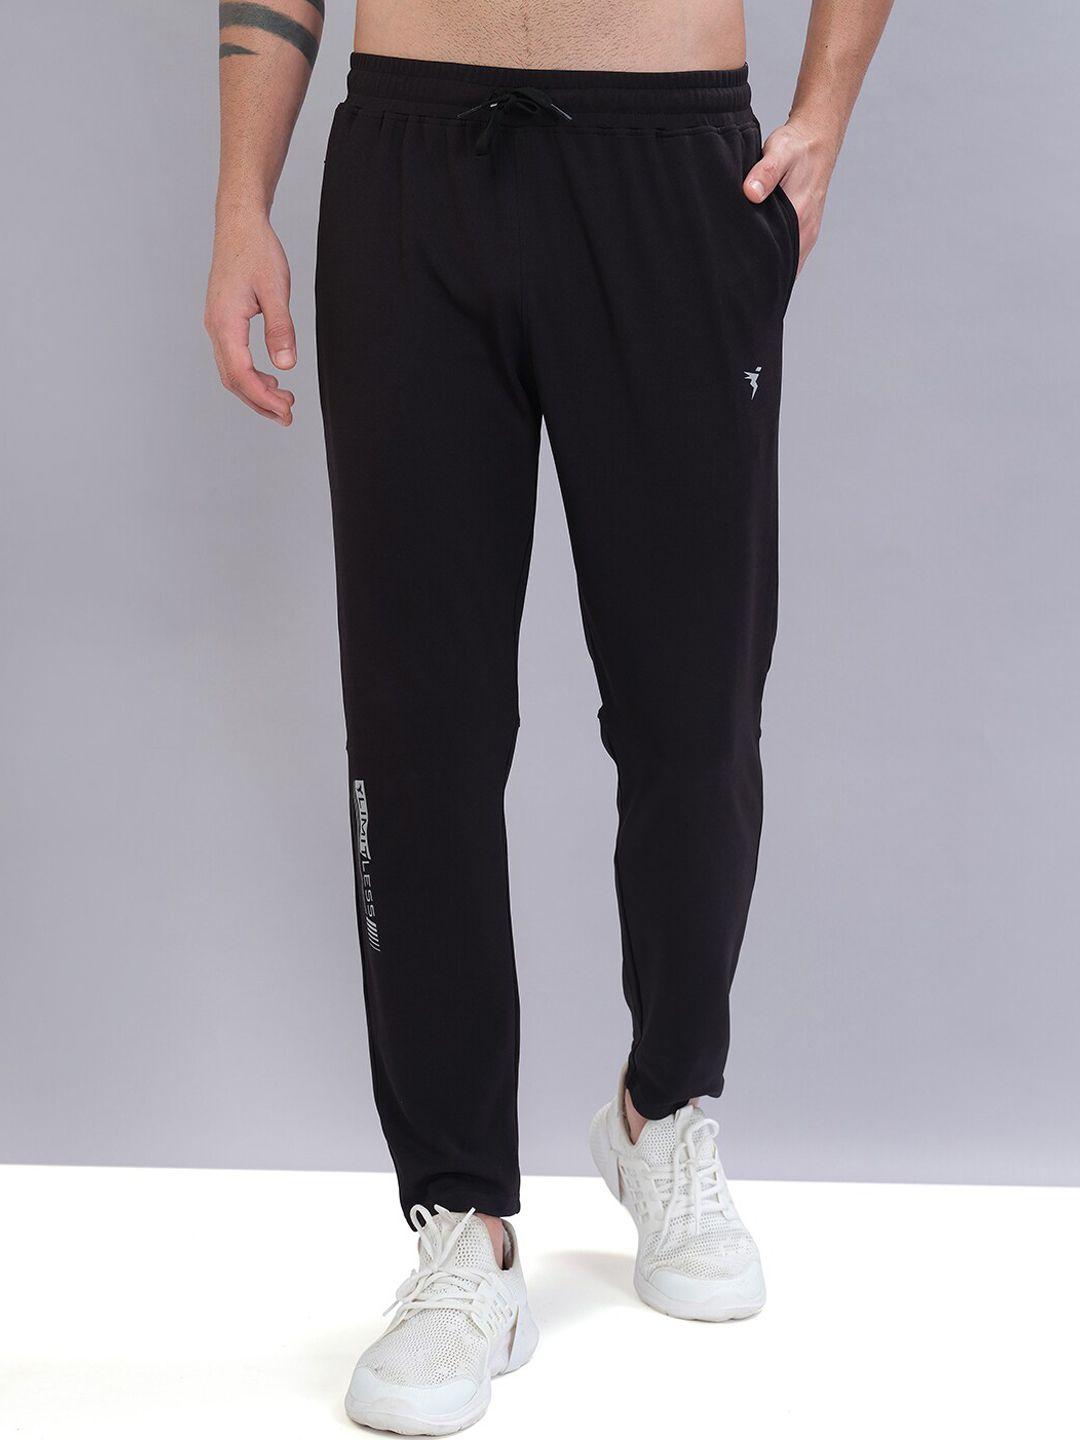 technosport london men relaxed fit antimicrobial track pants